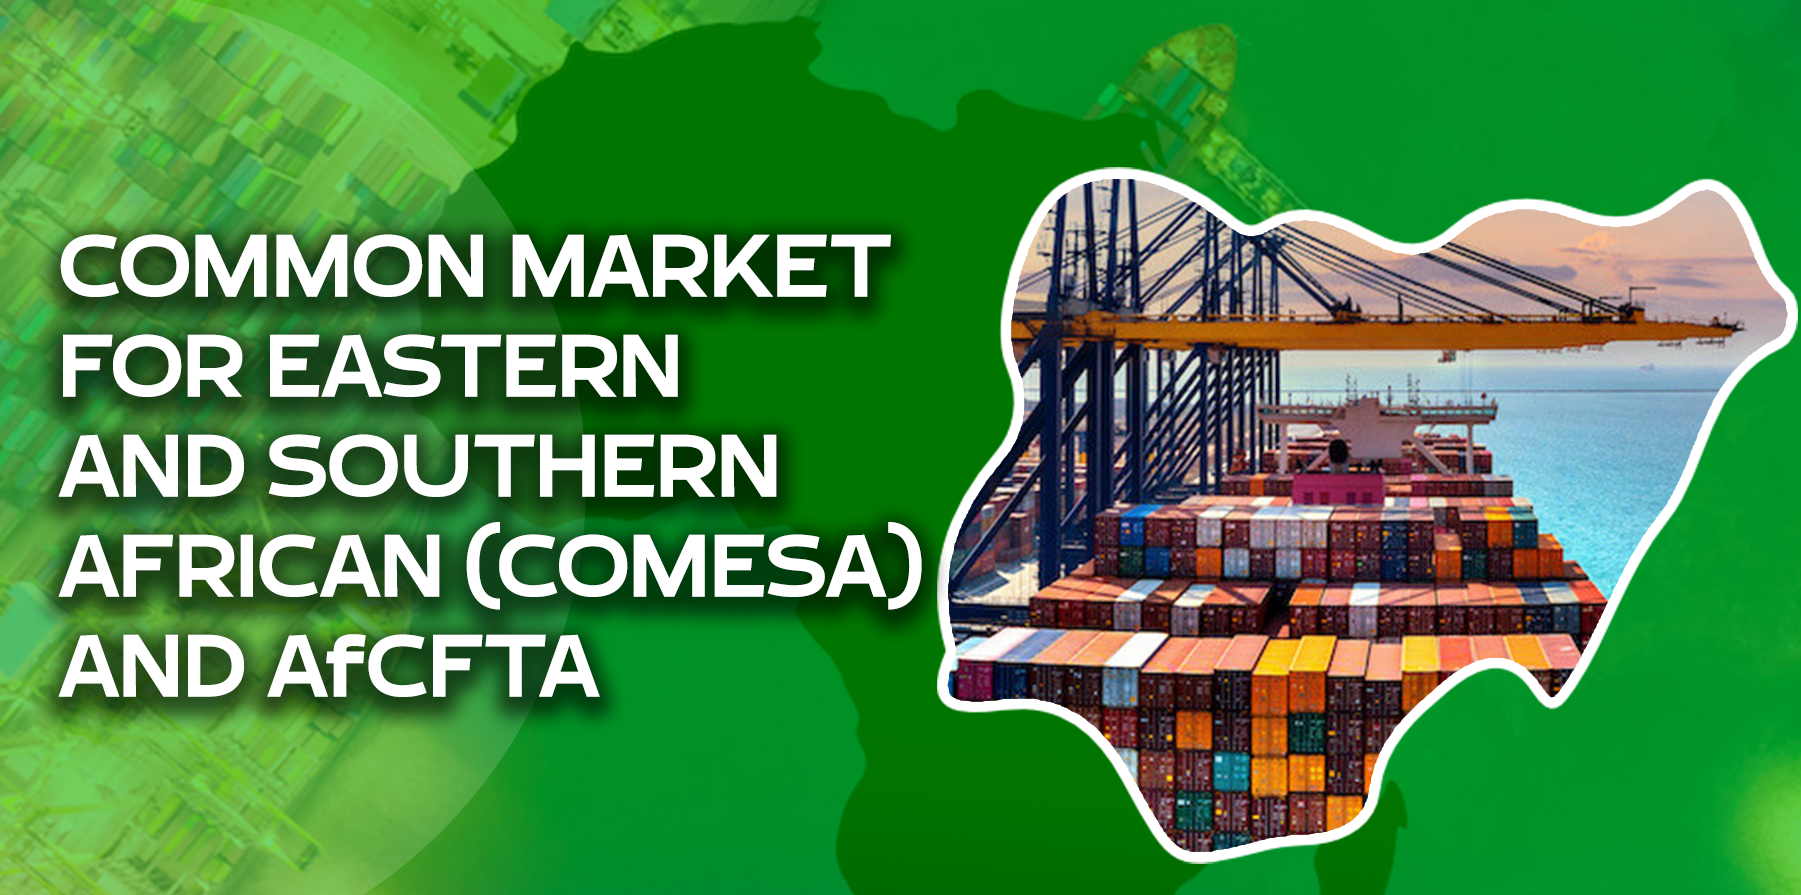 COMMON MARKET FOR EASTERN AND SOUTHERN AFRICAN (COMESA) AND AfCFTA